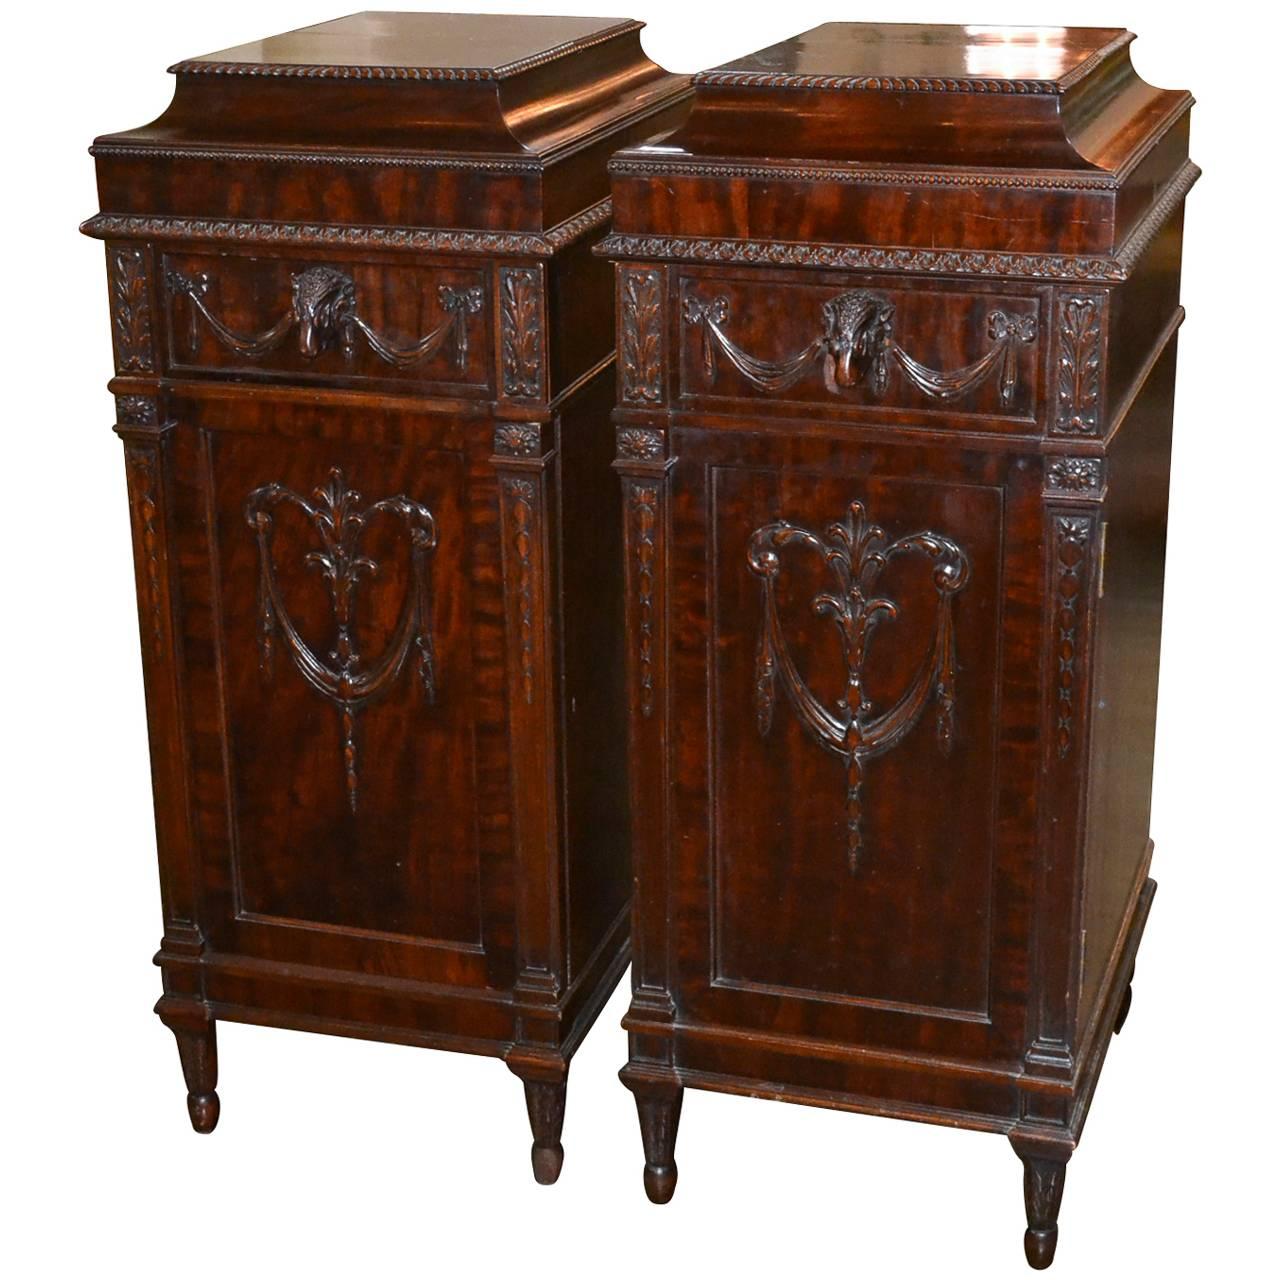 Pair of English Adams Pedestal Side Cabinets